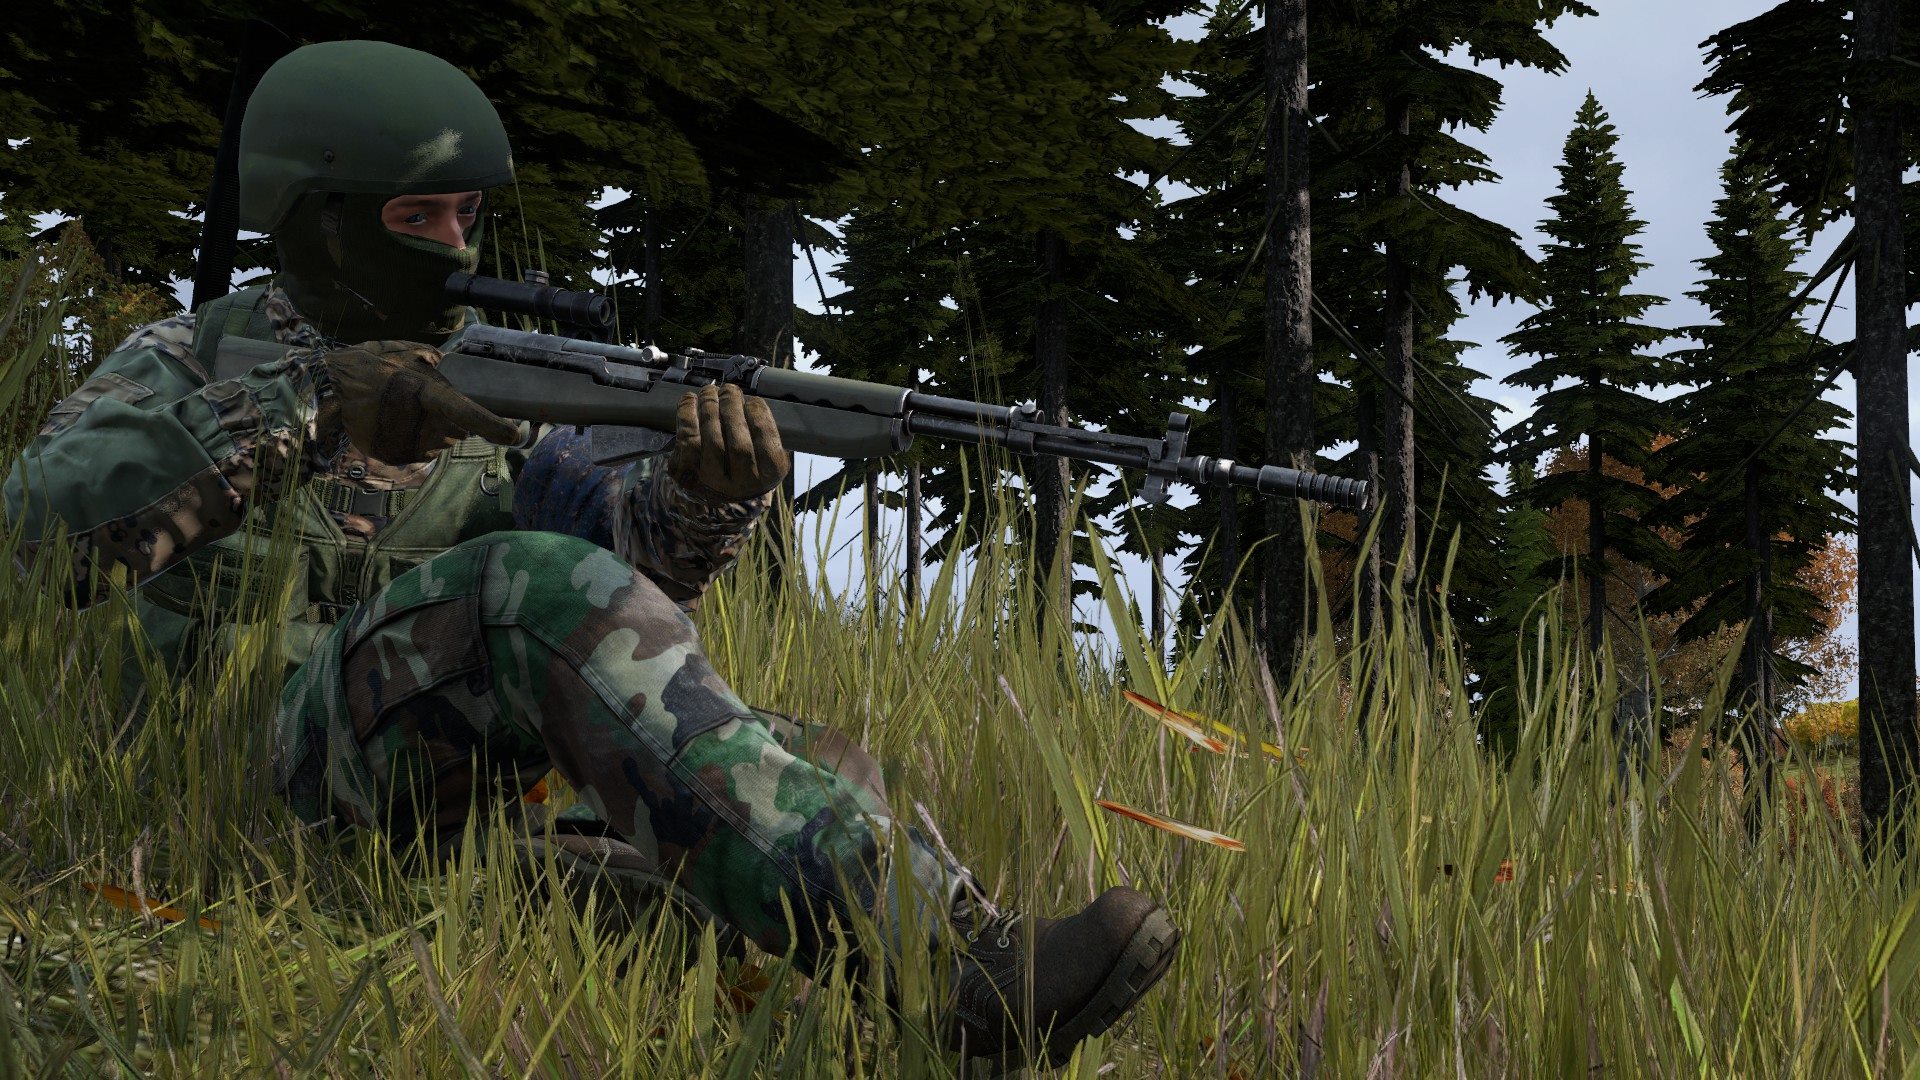 DayZ snipers are the real monsters